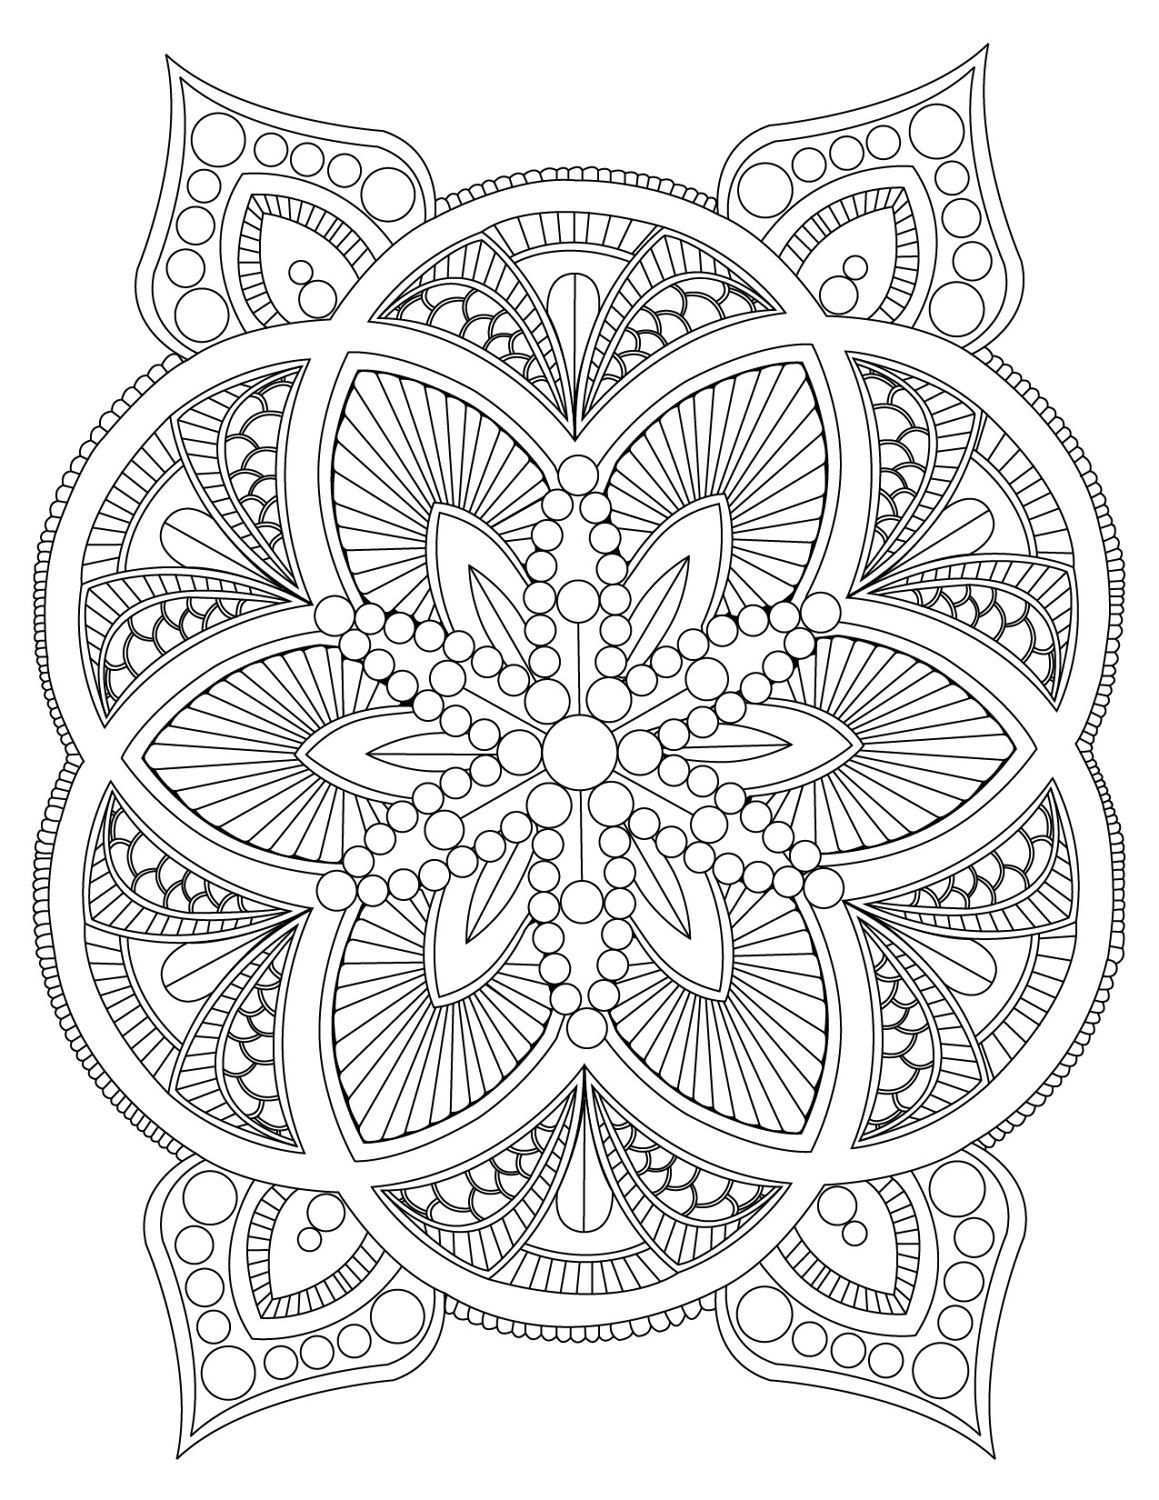 Abstract Mandala Coloring Page For Adults Digital Download Mandala Coloring Pages Abs